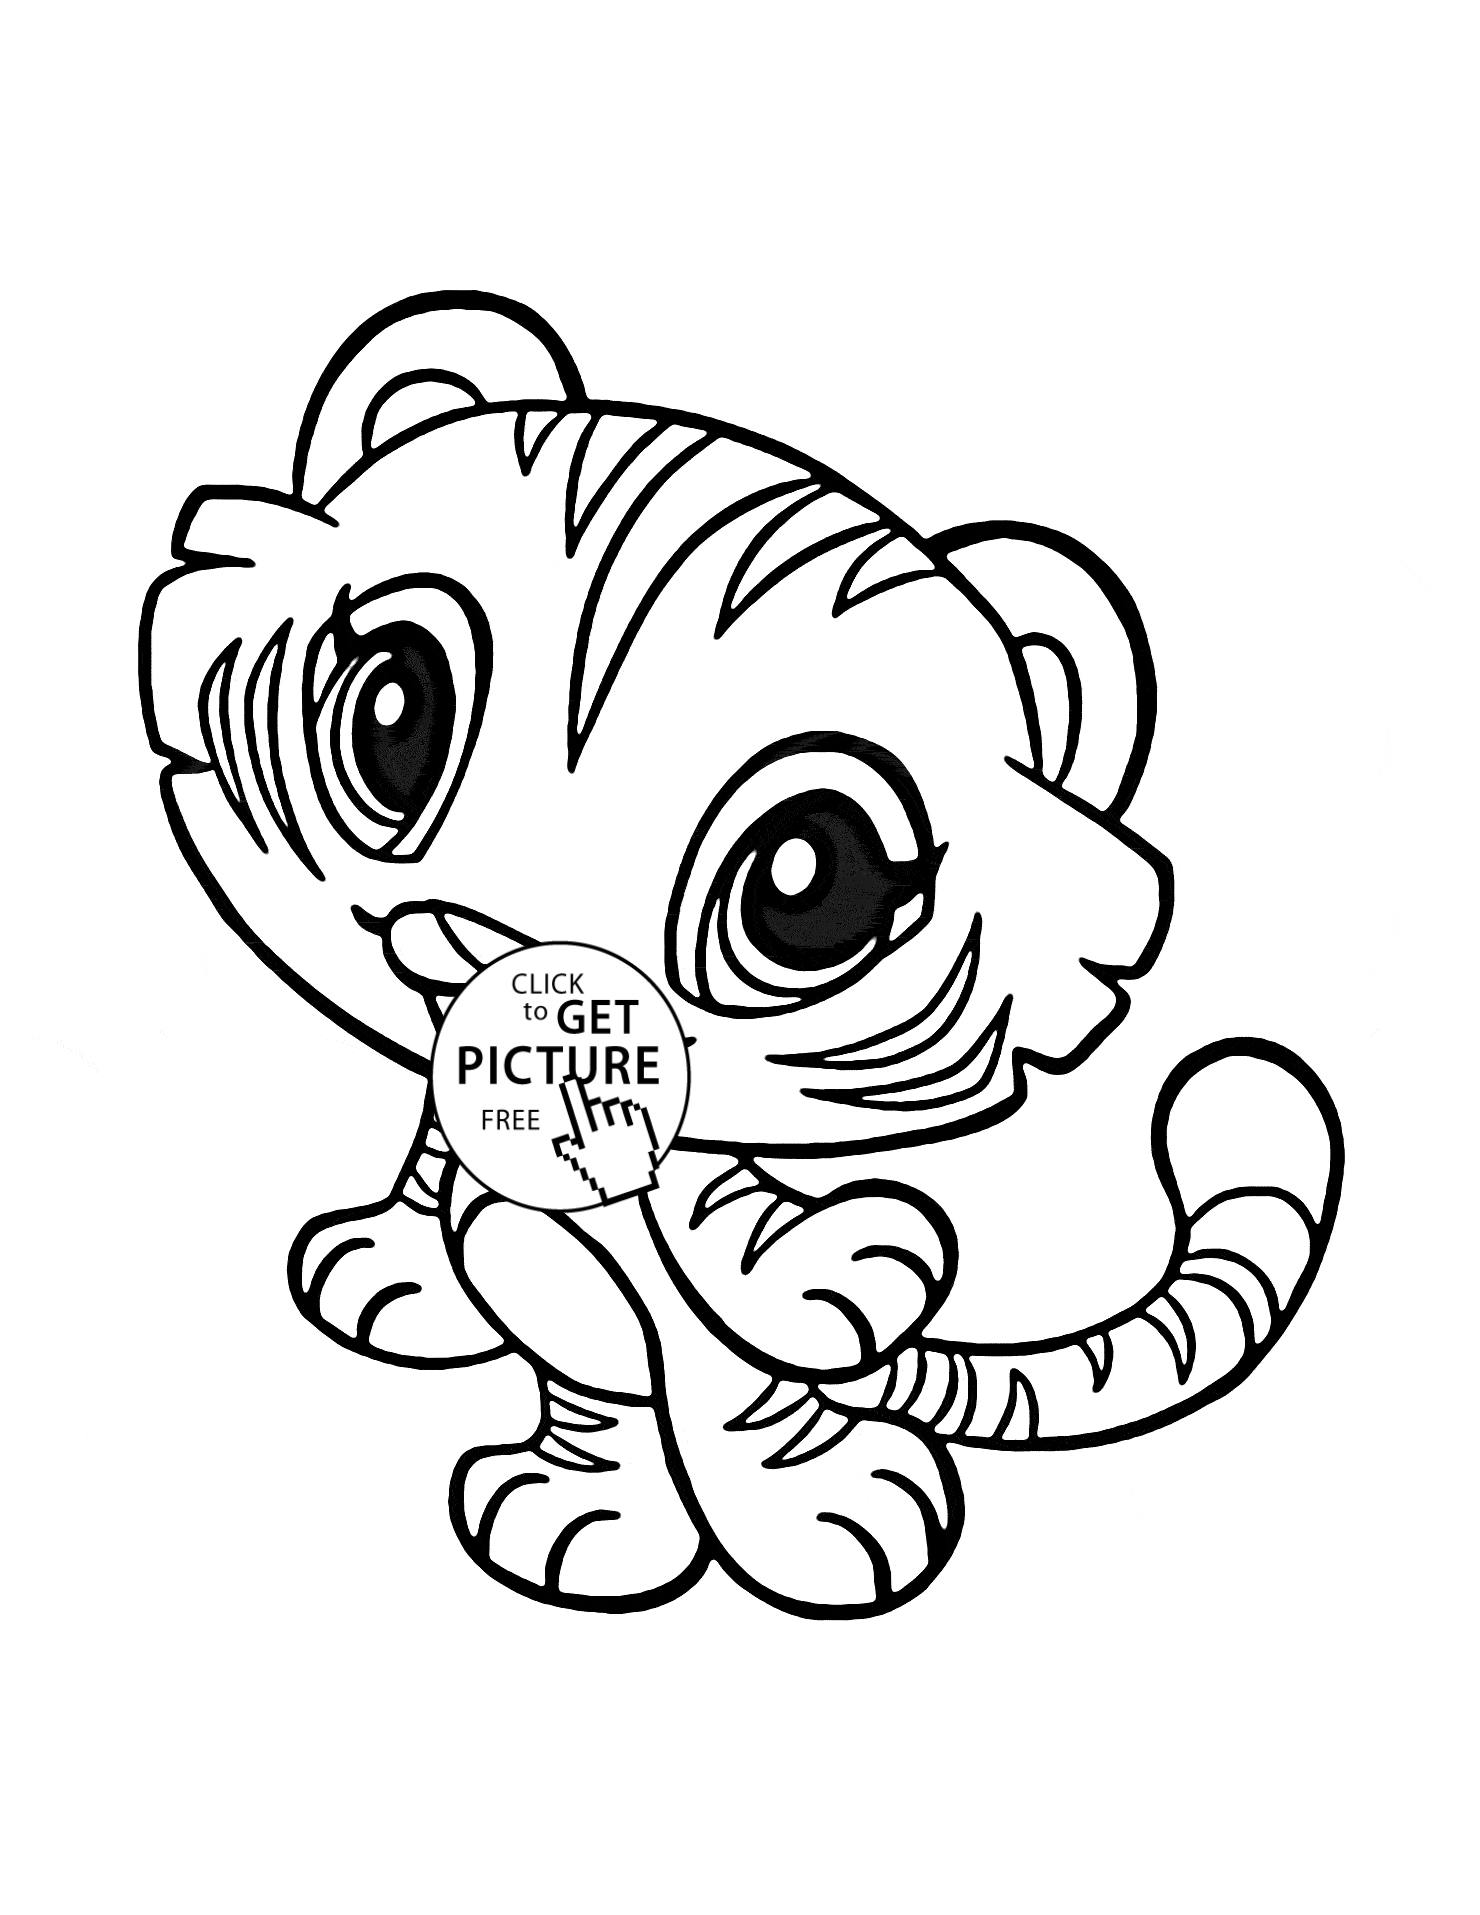 Coloring Pages Of Cute Tigers Tiger Cute Little Animal Coloring Pages Print Coloring